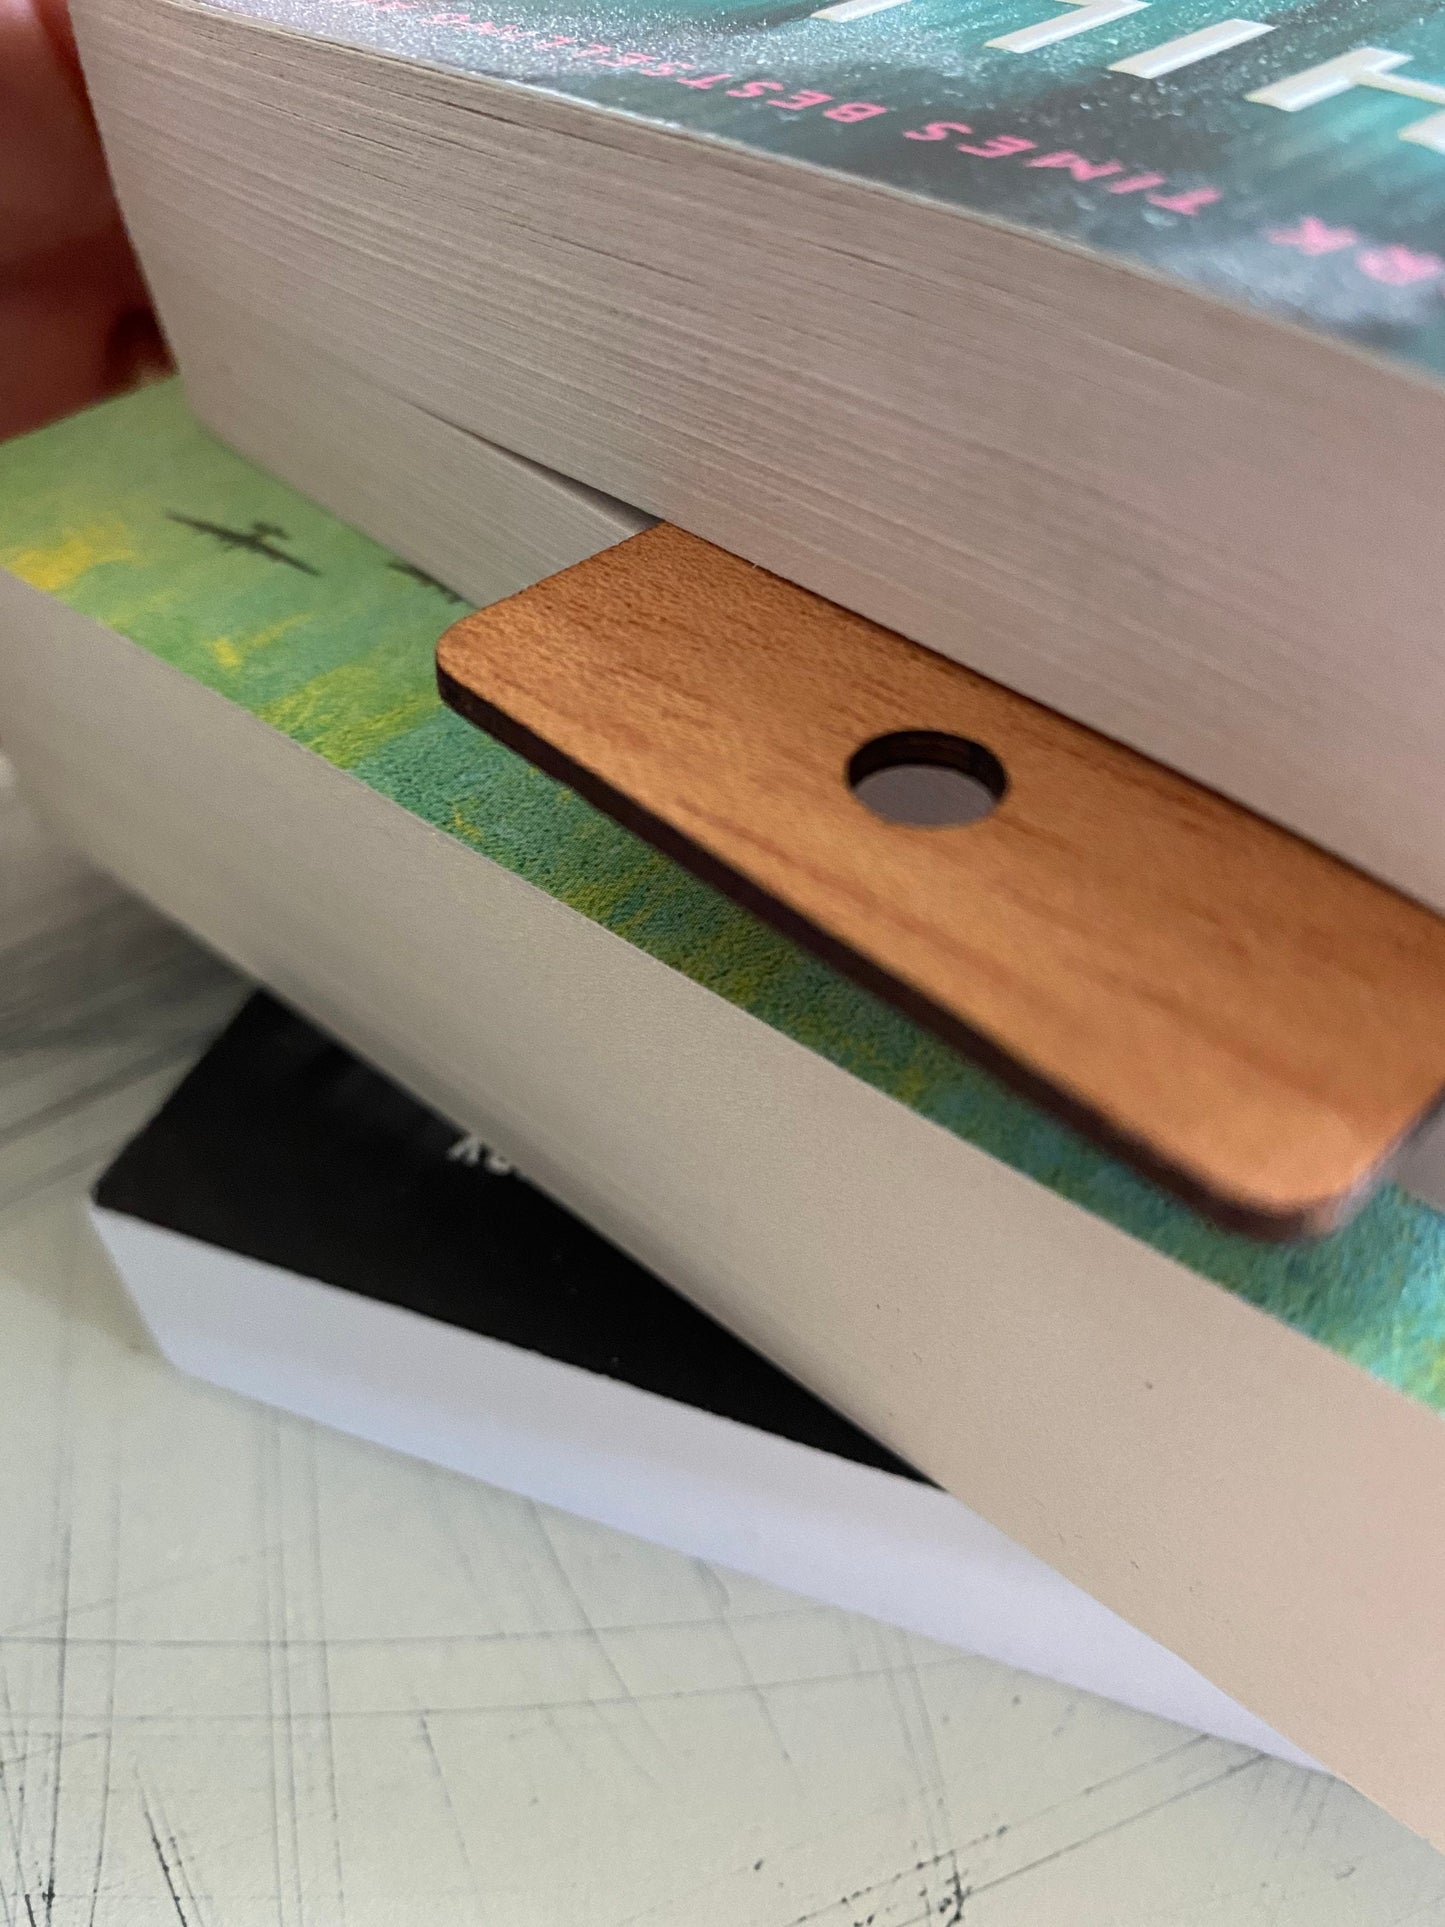 I’m trying very hard not to connect with people right now - wood bookmark